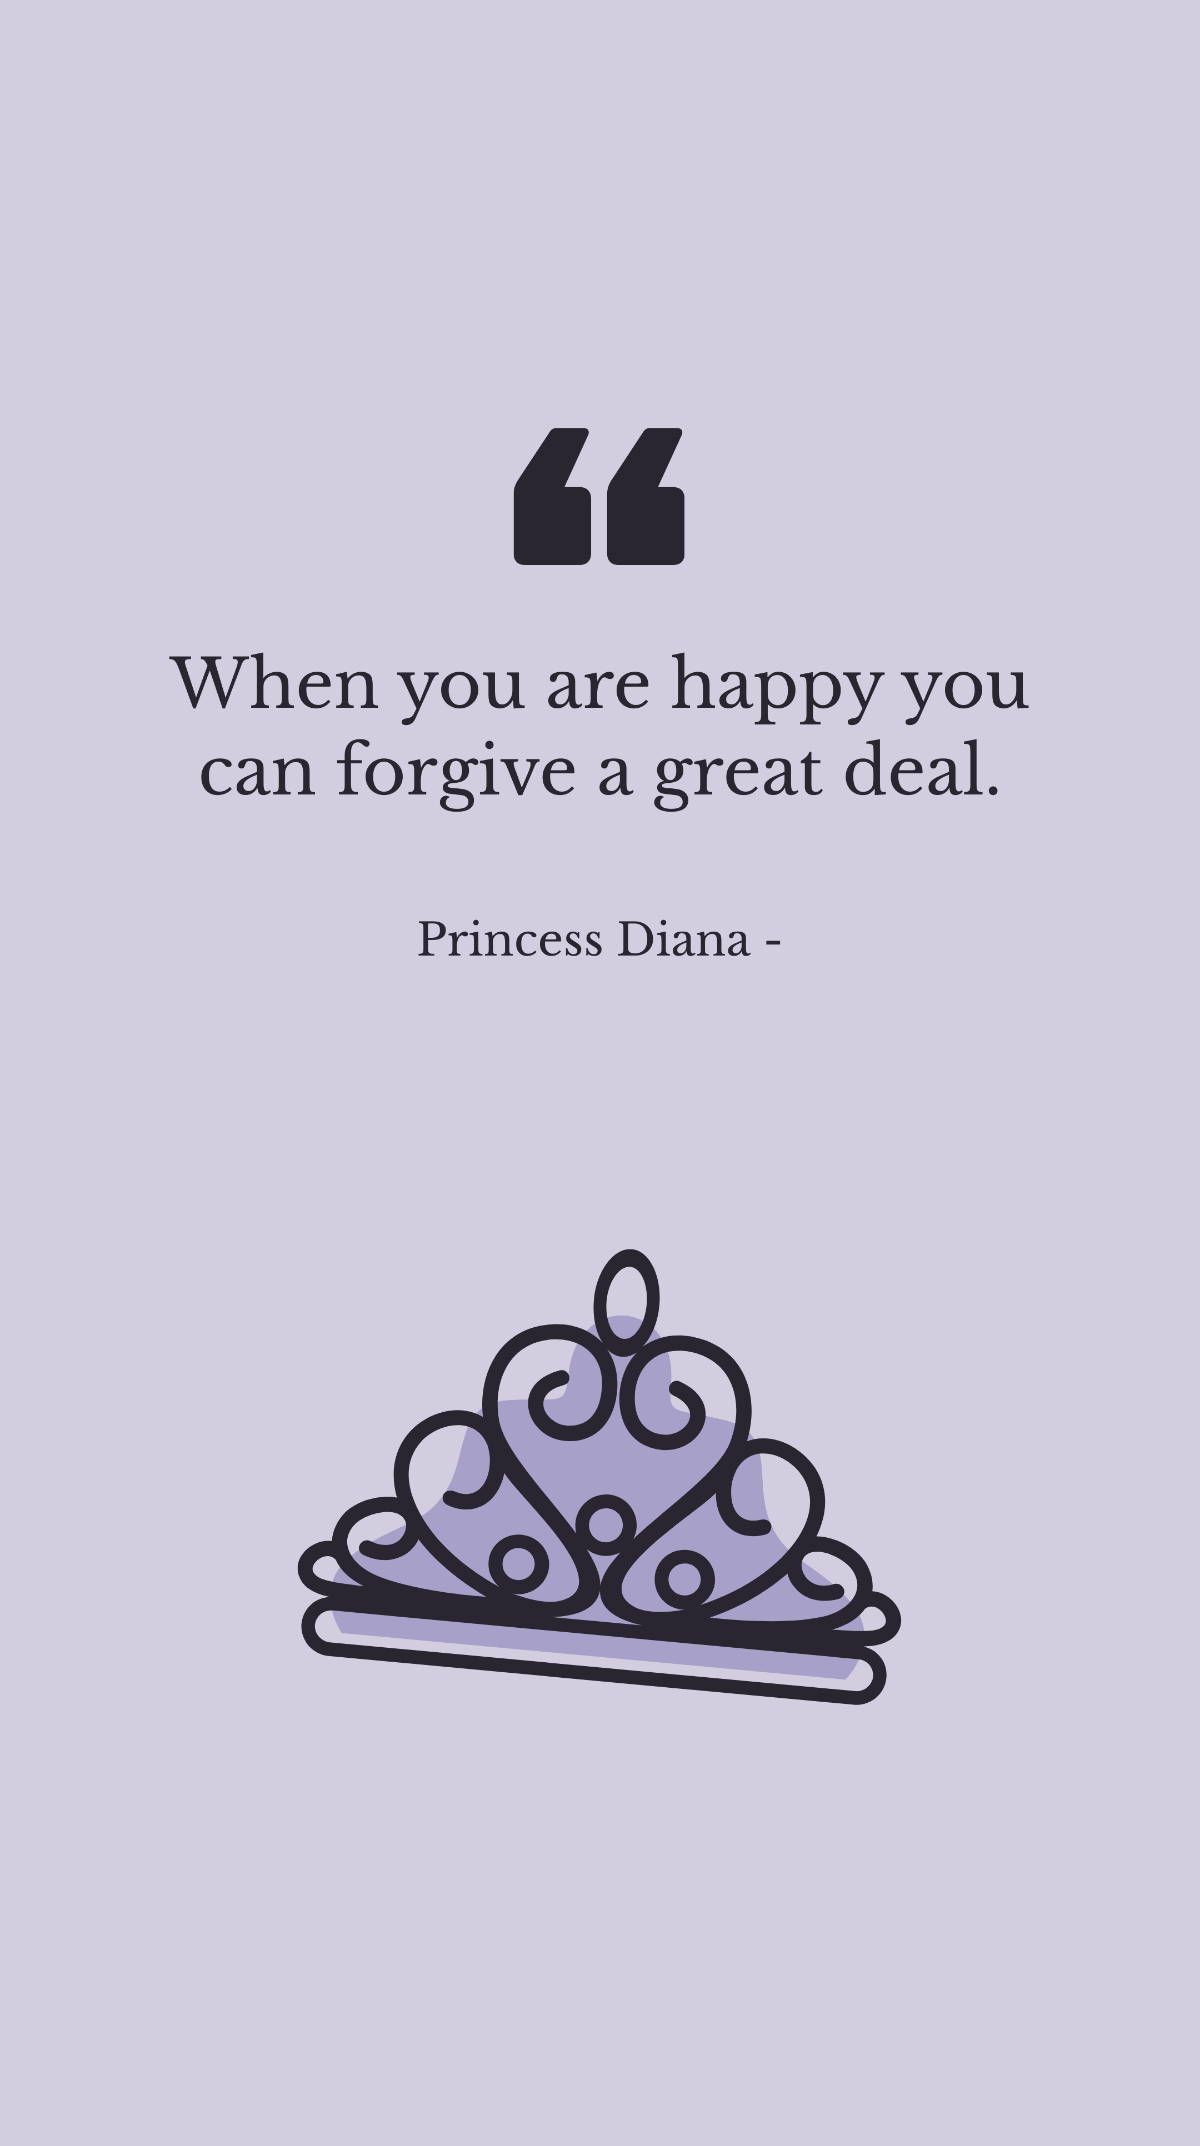 Free Princess Diana - When you are happy you can forgive a great deal. Template